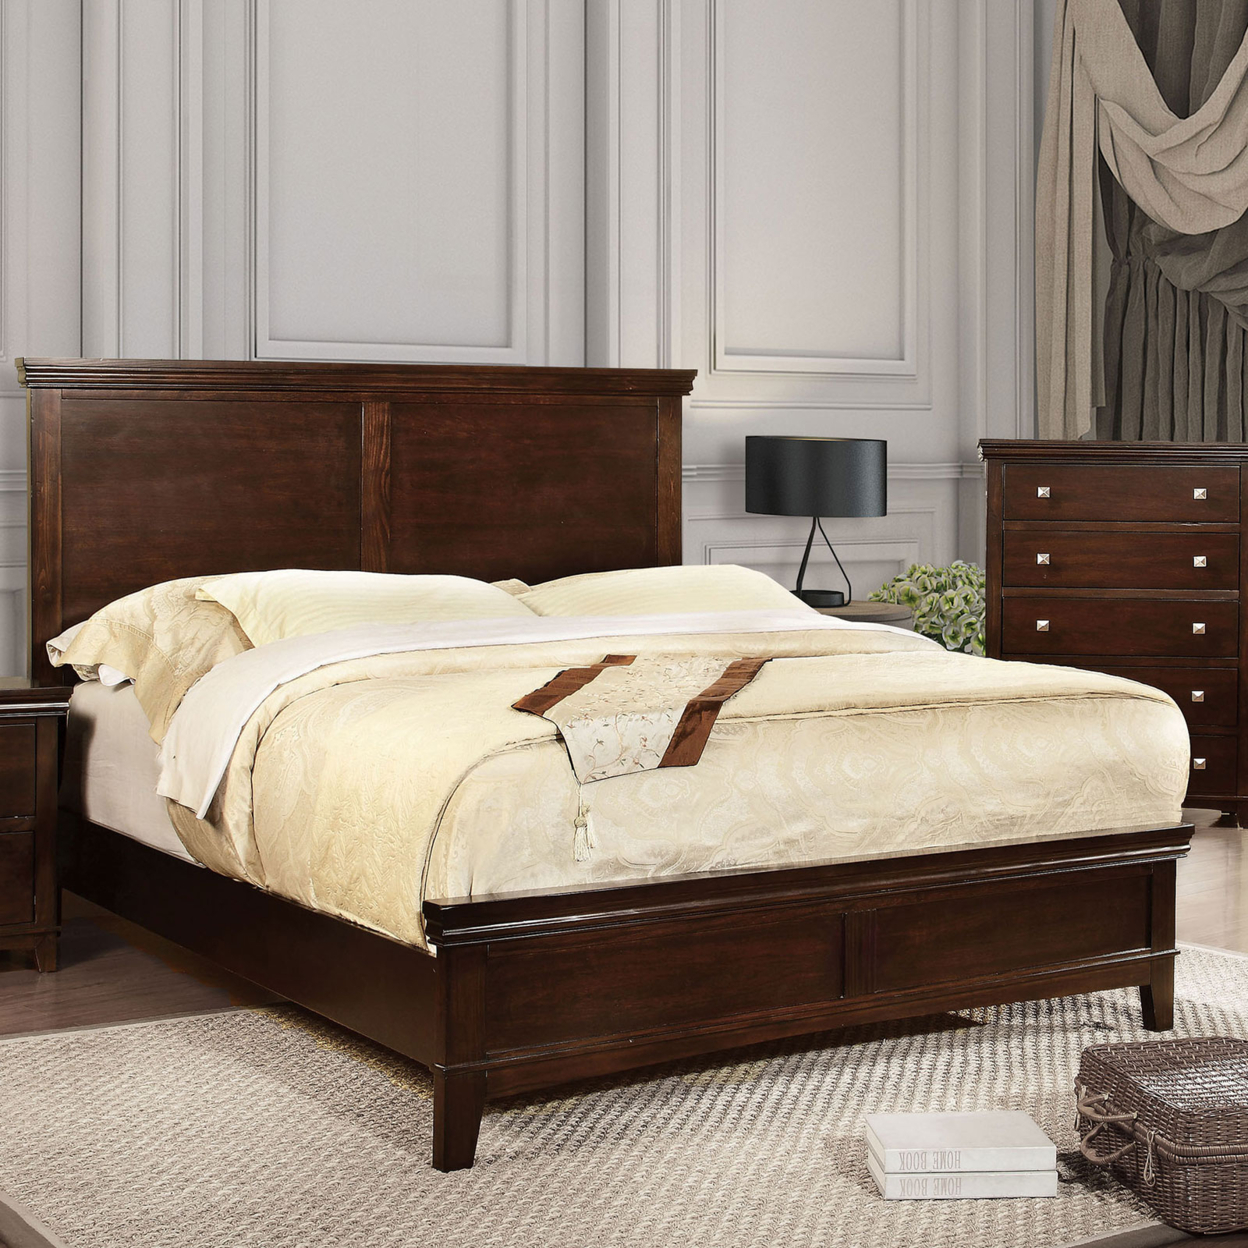 Transitional Full Bed With Panel Headboard And Footboard, Cherry Brown- Saltoro Sherpi